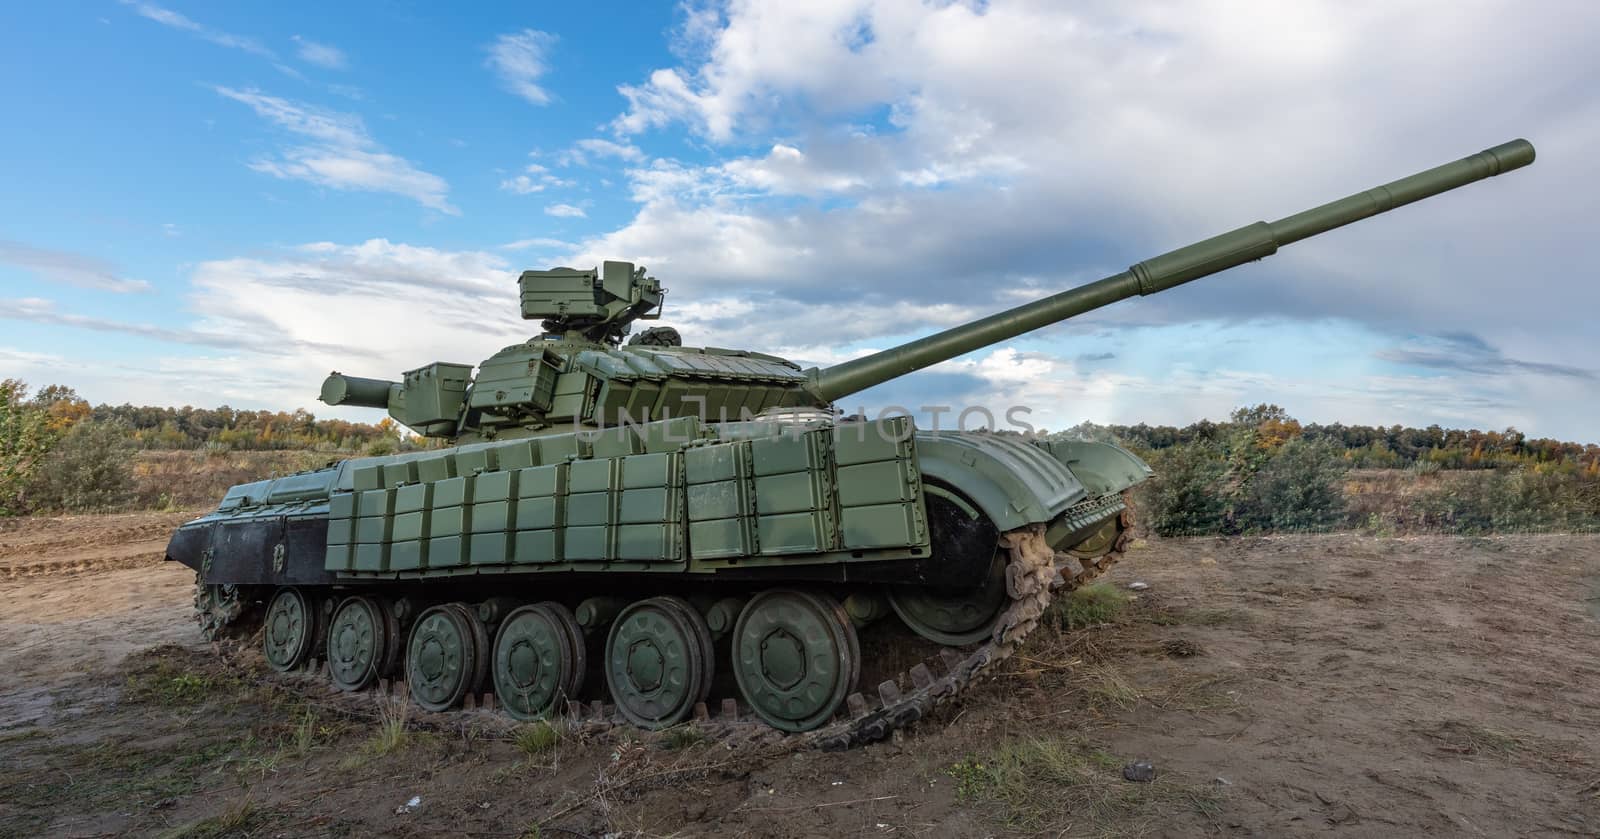 A side shot of russian tank T-64 in the field. Blue cloudy sky as a background.